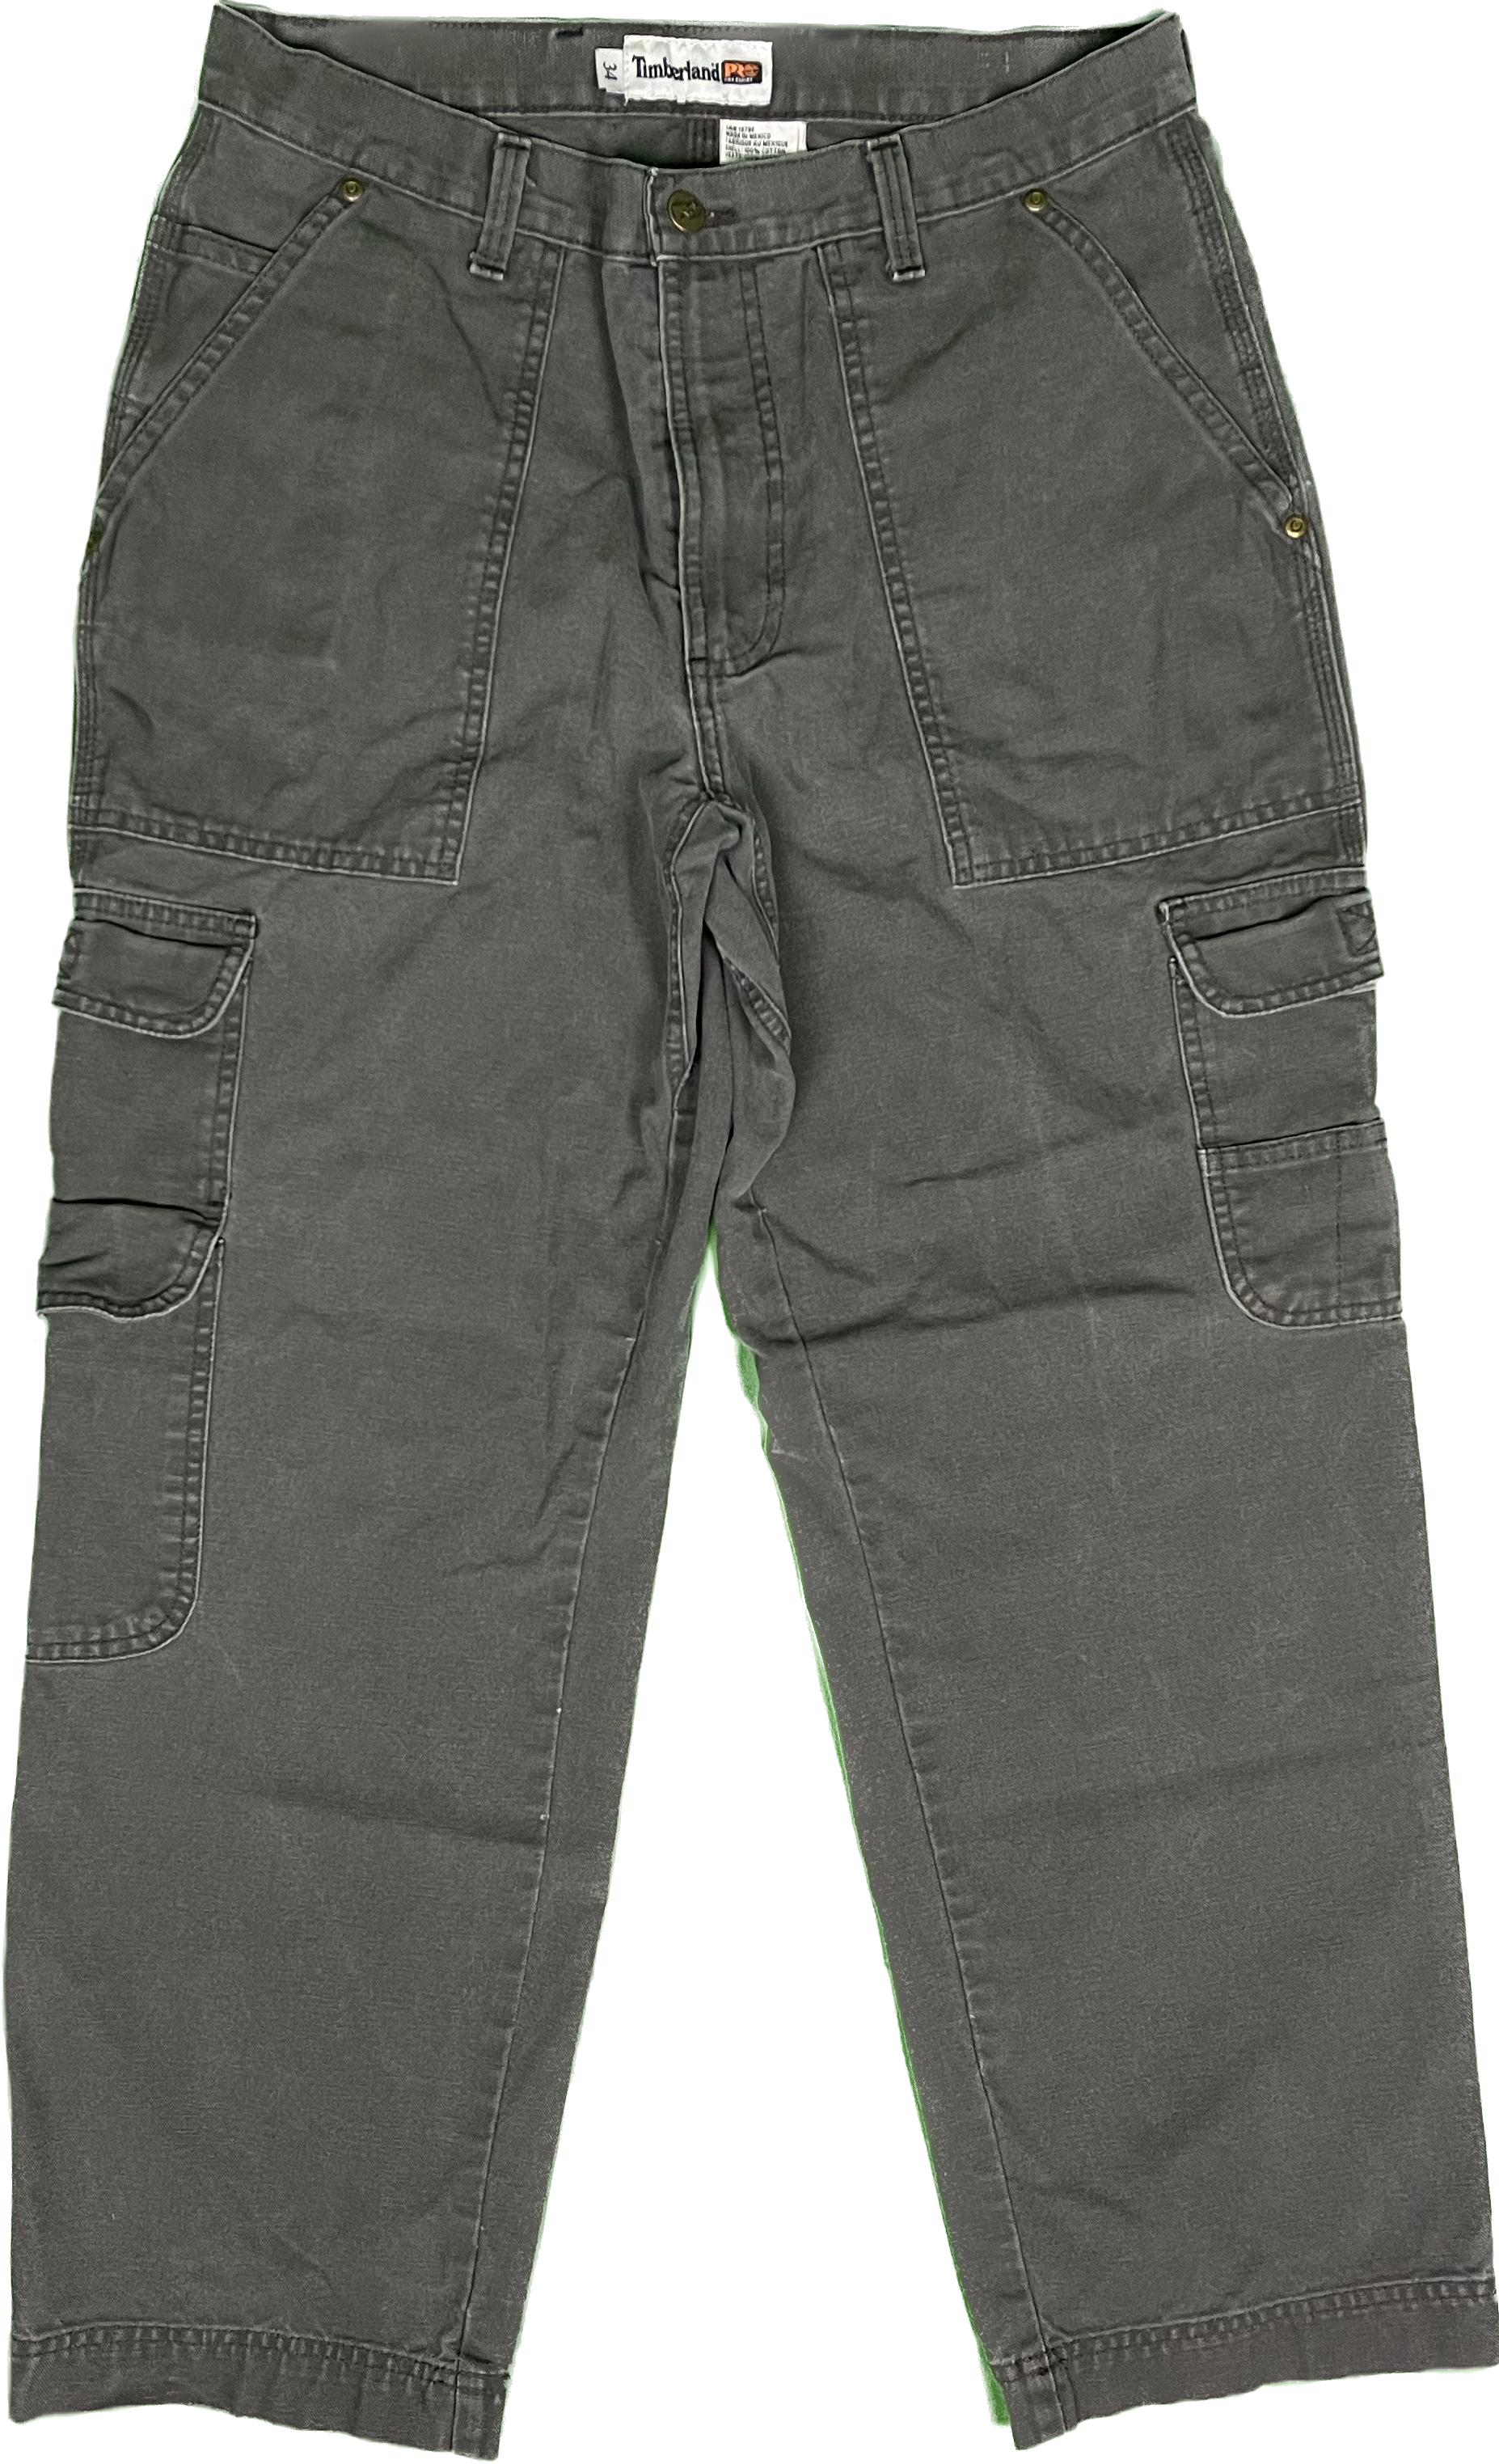 Timberland Pro Series Vintage Cargo Jeans